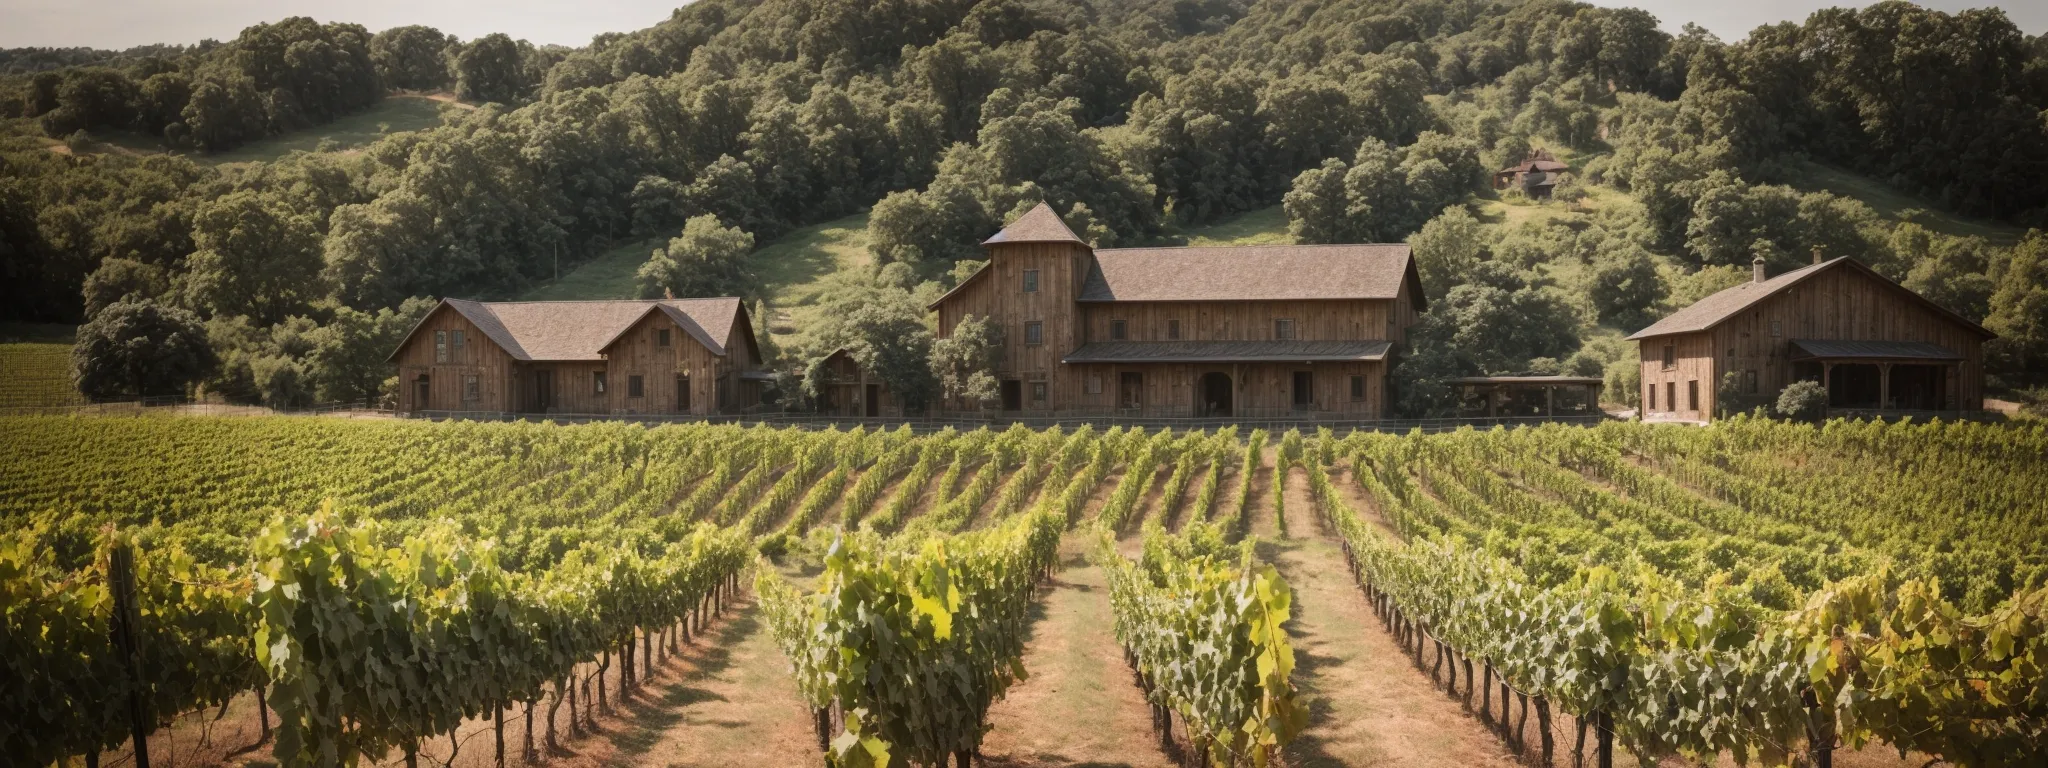 rows of grapevines stretch across a sunny vineyard with a rustic winery building in the background.